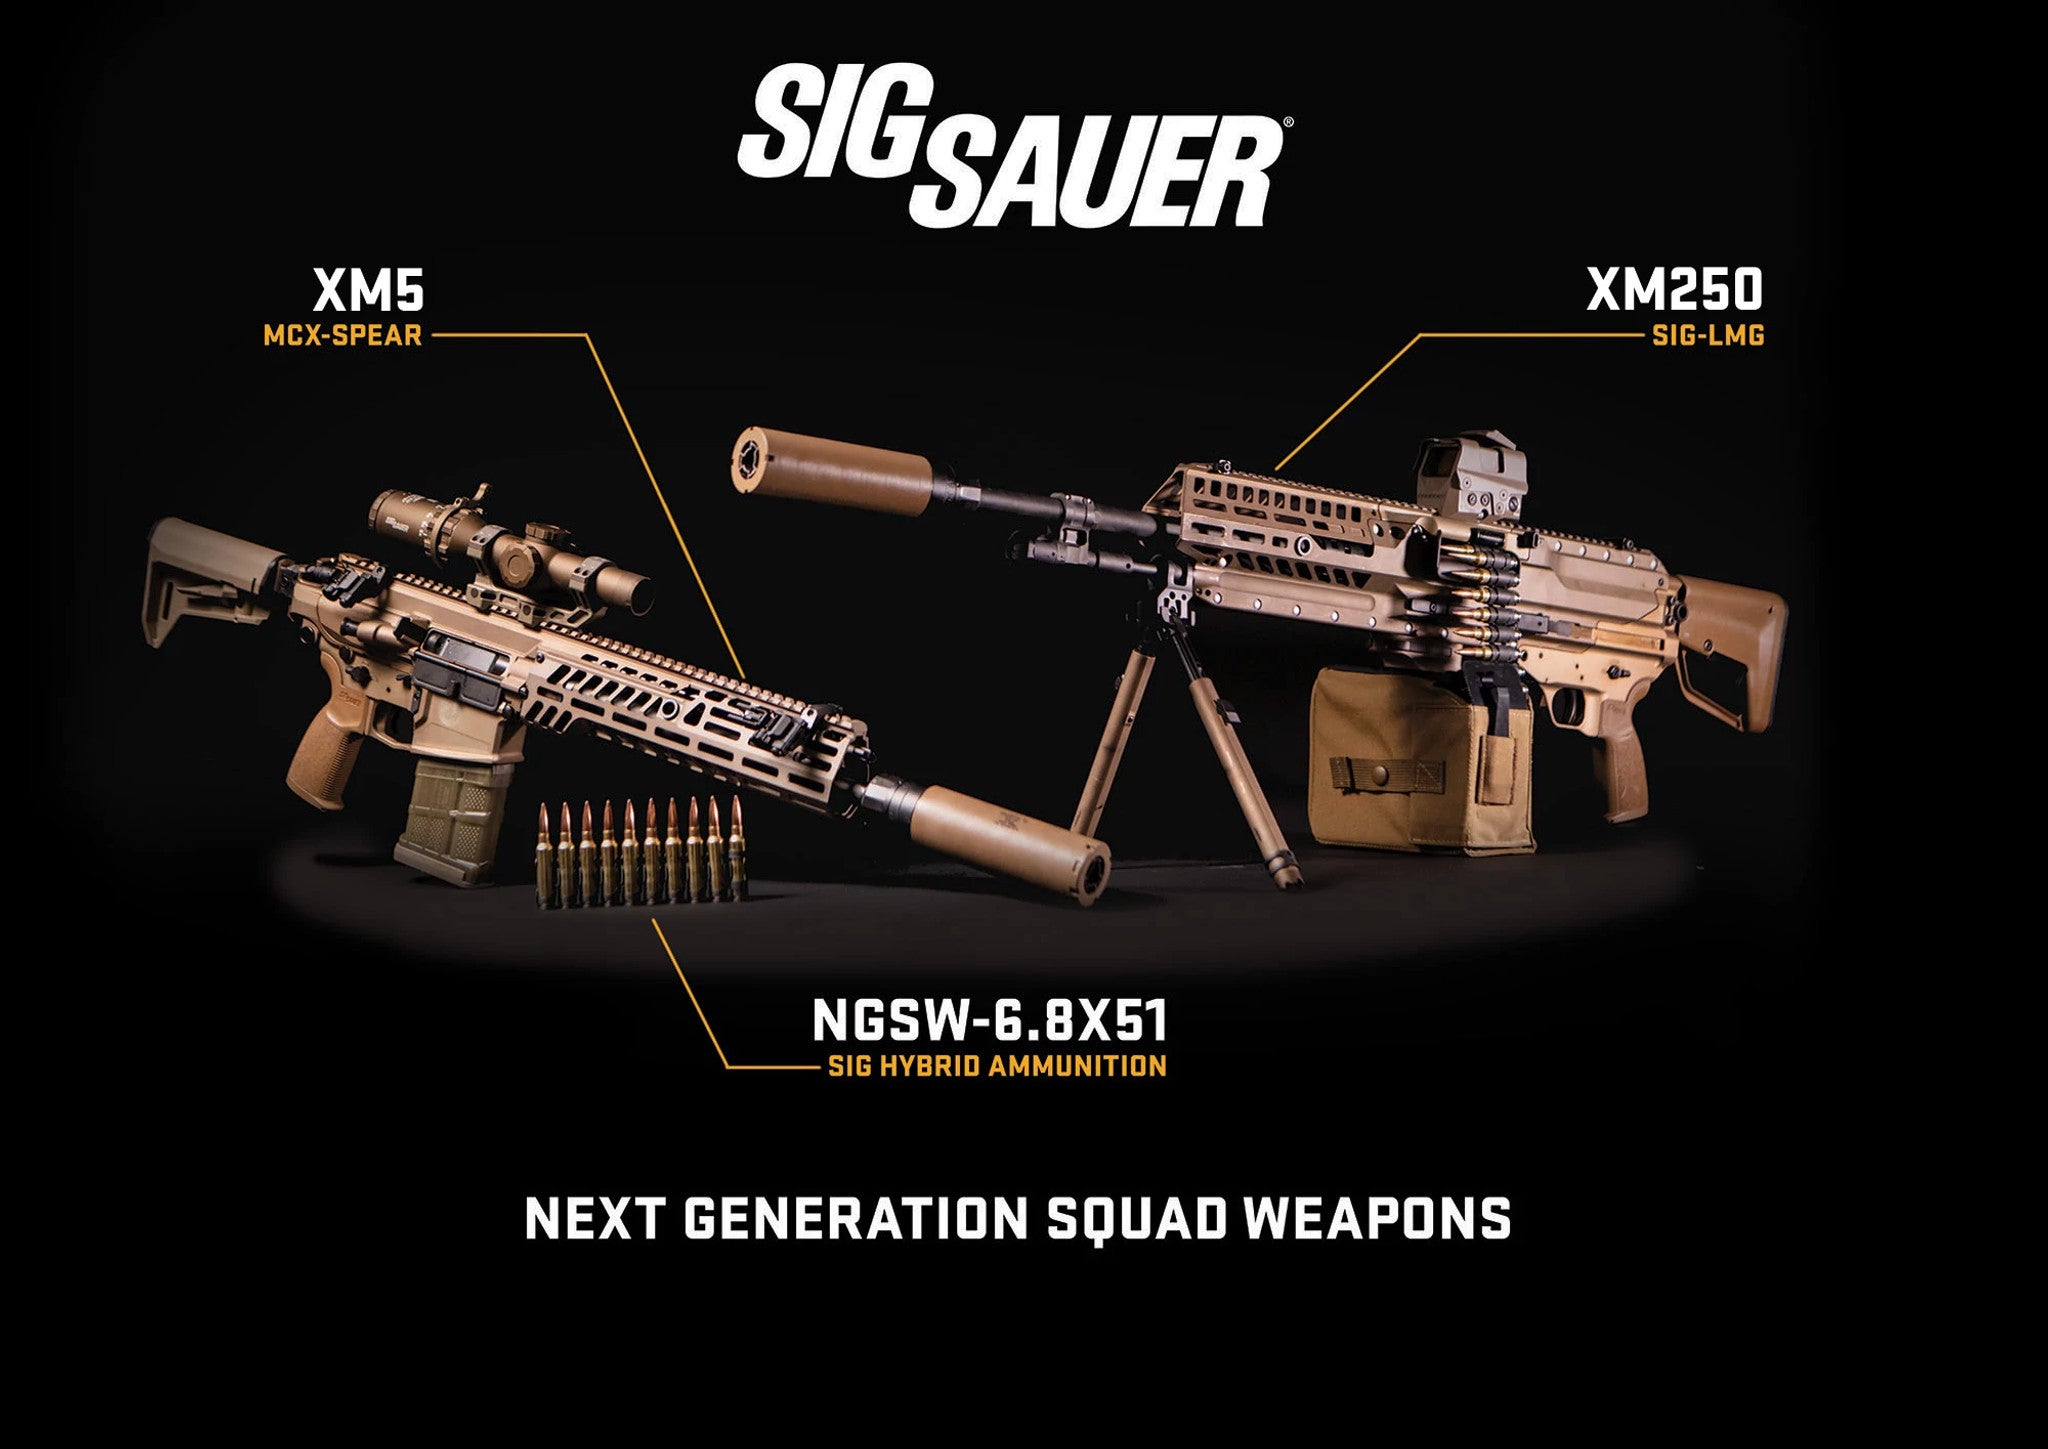 You can get your hands on the Next Generation Squad Weapon before the Army does